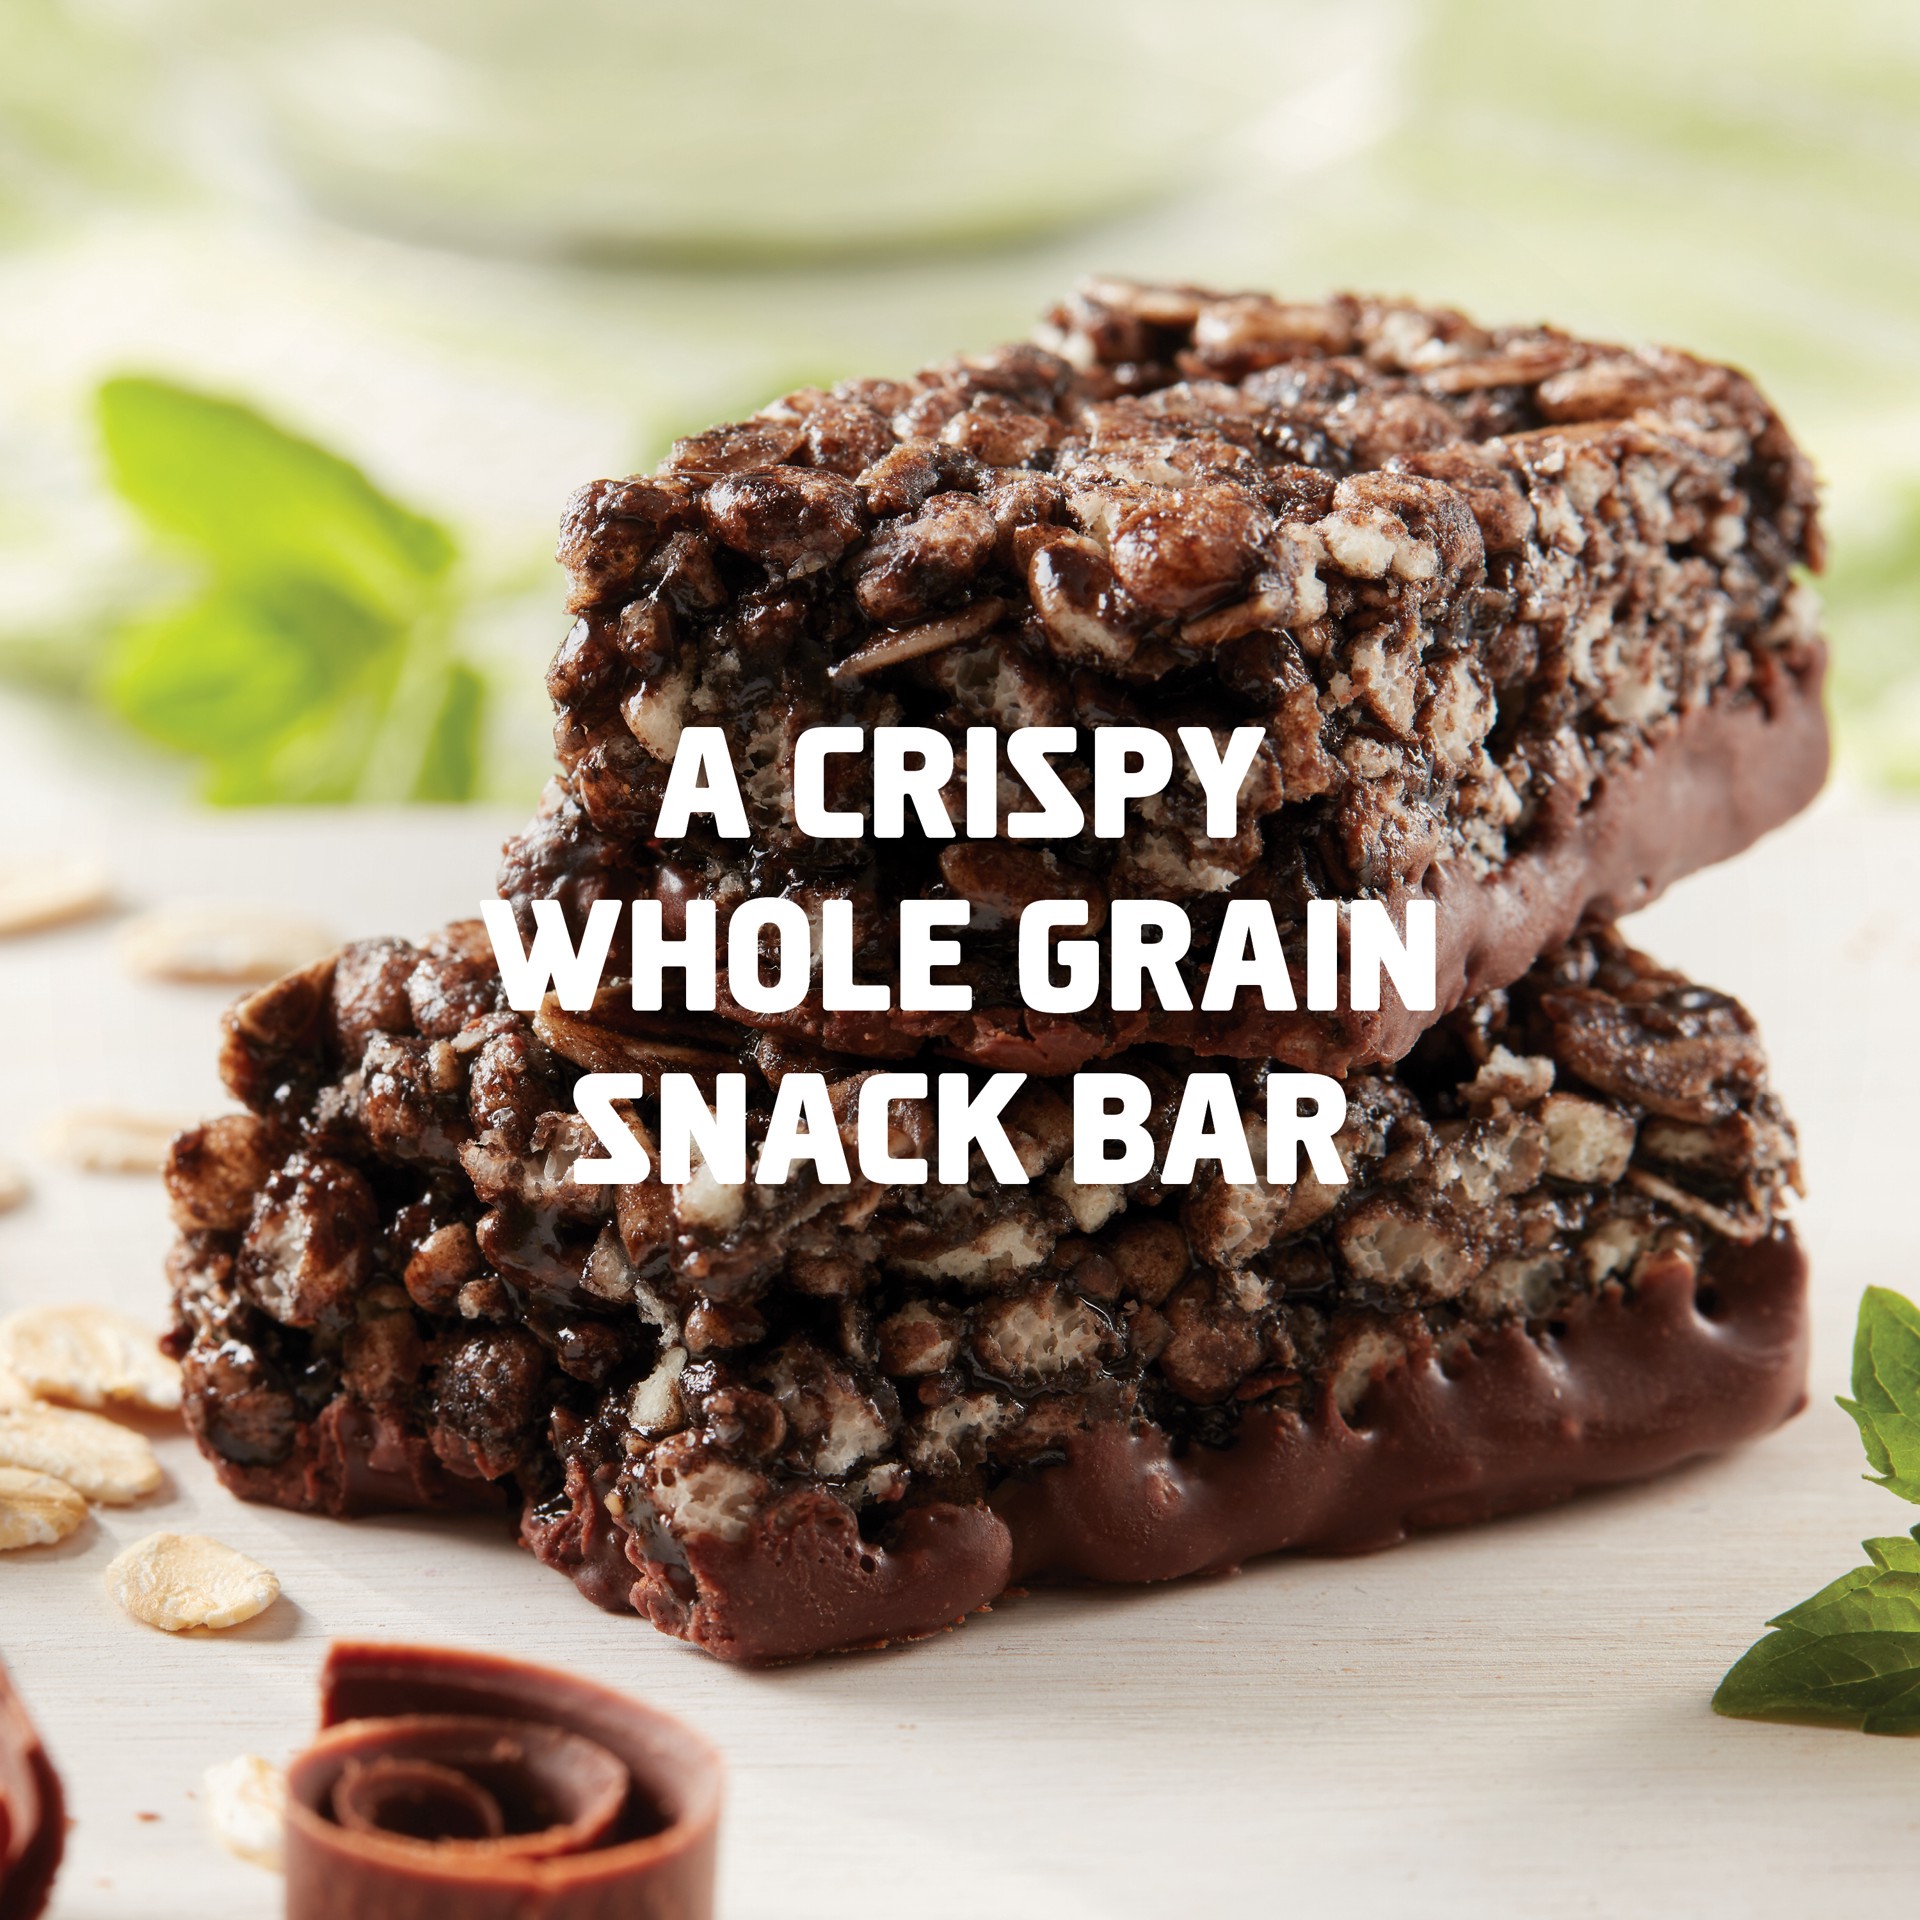 slide 6 of 7, CLIF Kid Zbar Protein - Chocolate Mint - Crispy Whole Grain Snack Bars - Made with Organic Oats - Non-GMO - 5g Protein - 1.27 oz. (5 Pack), 5 ct; 1.27 oz